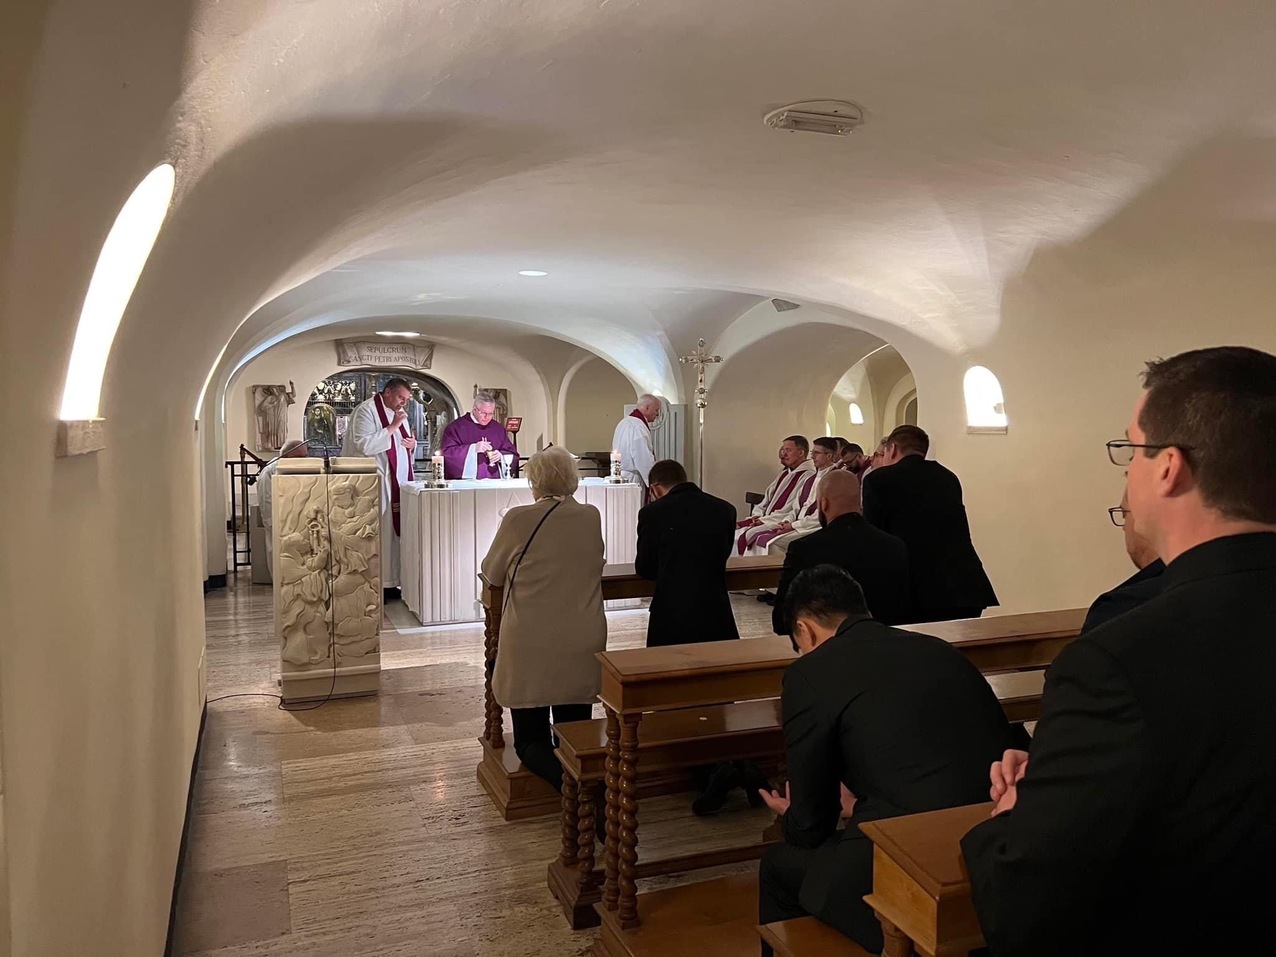 Day 4: Sunday Mass at St. Peter’s, Angelus among day's events for seminary group